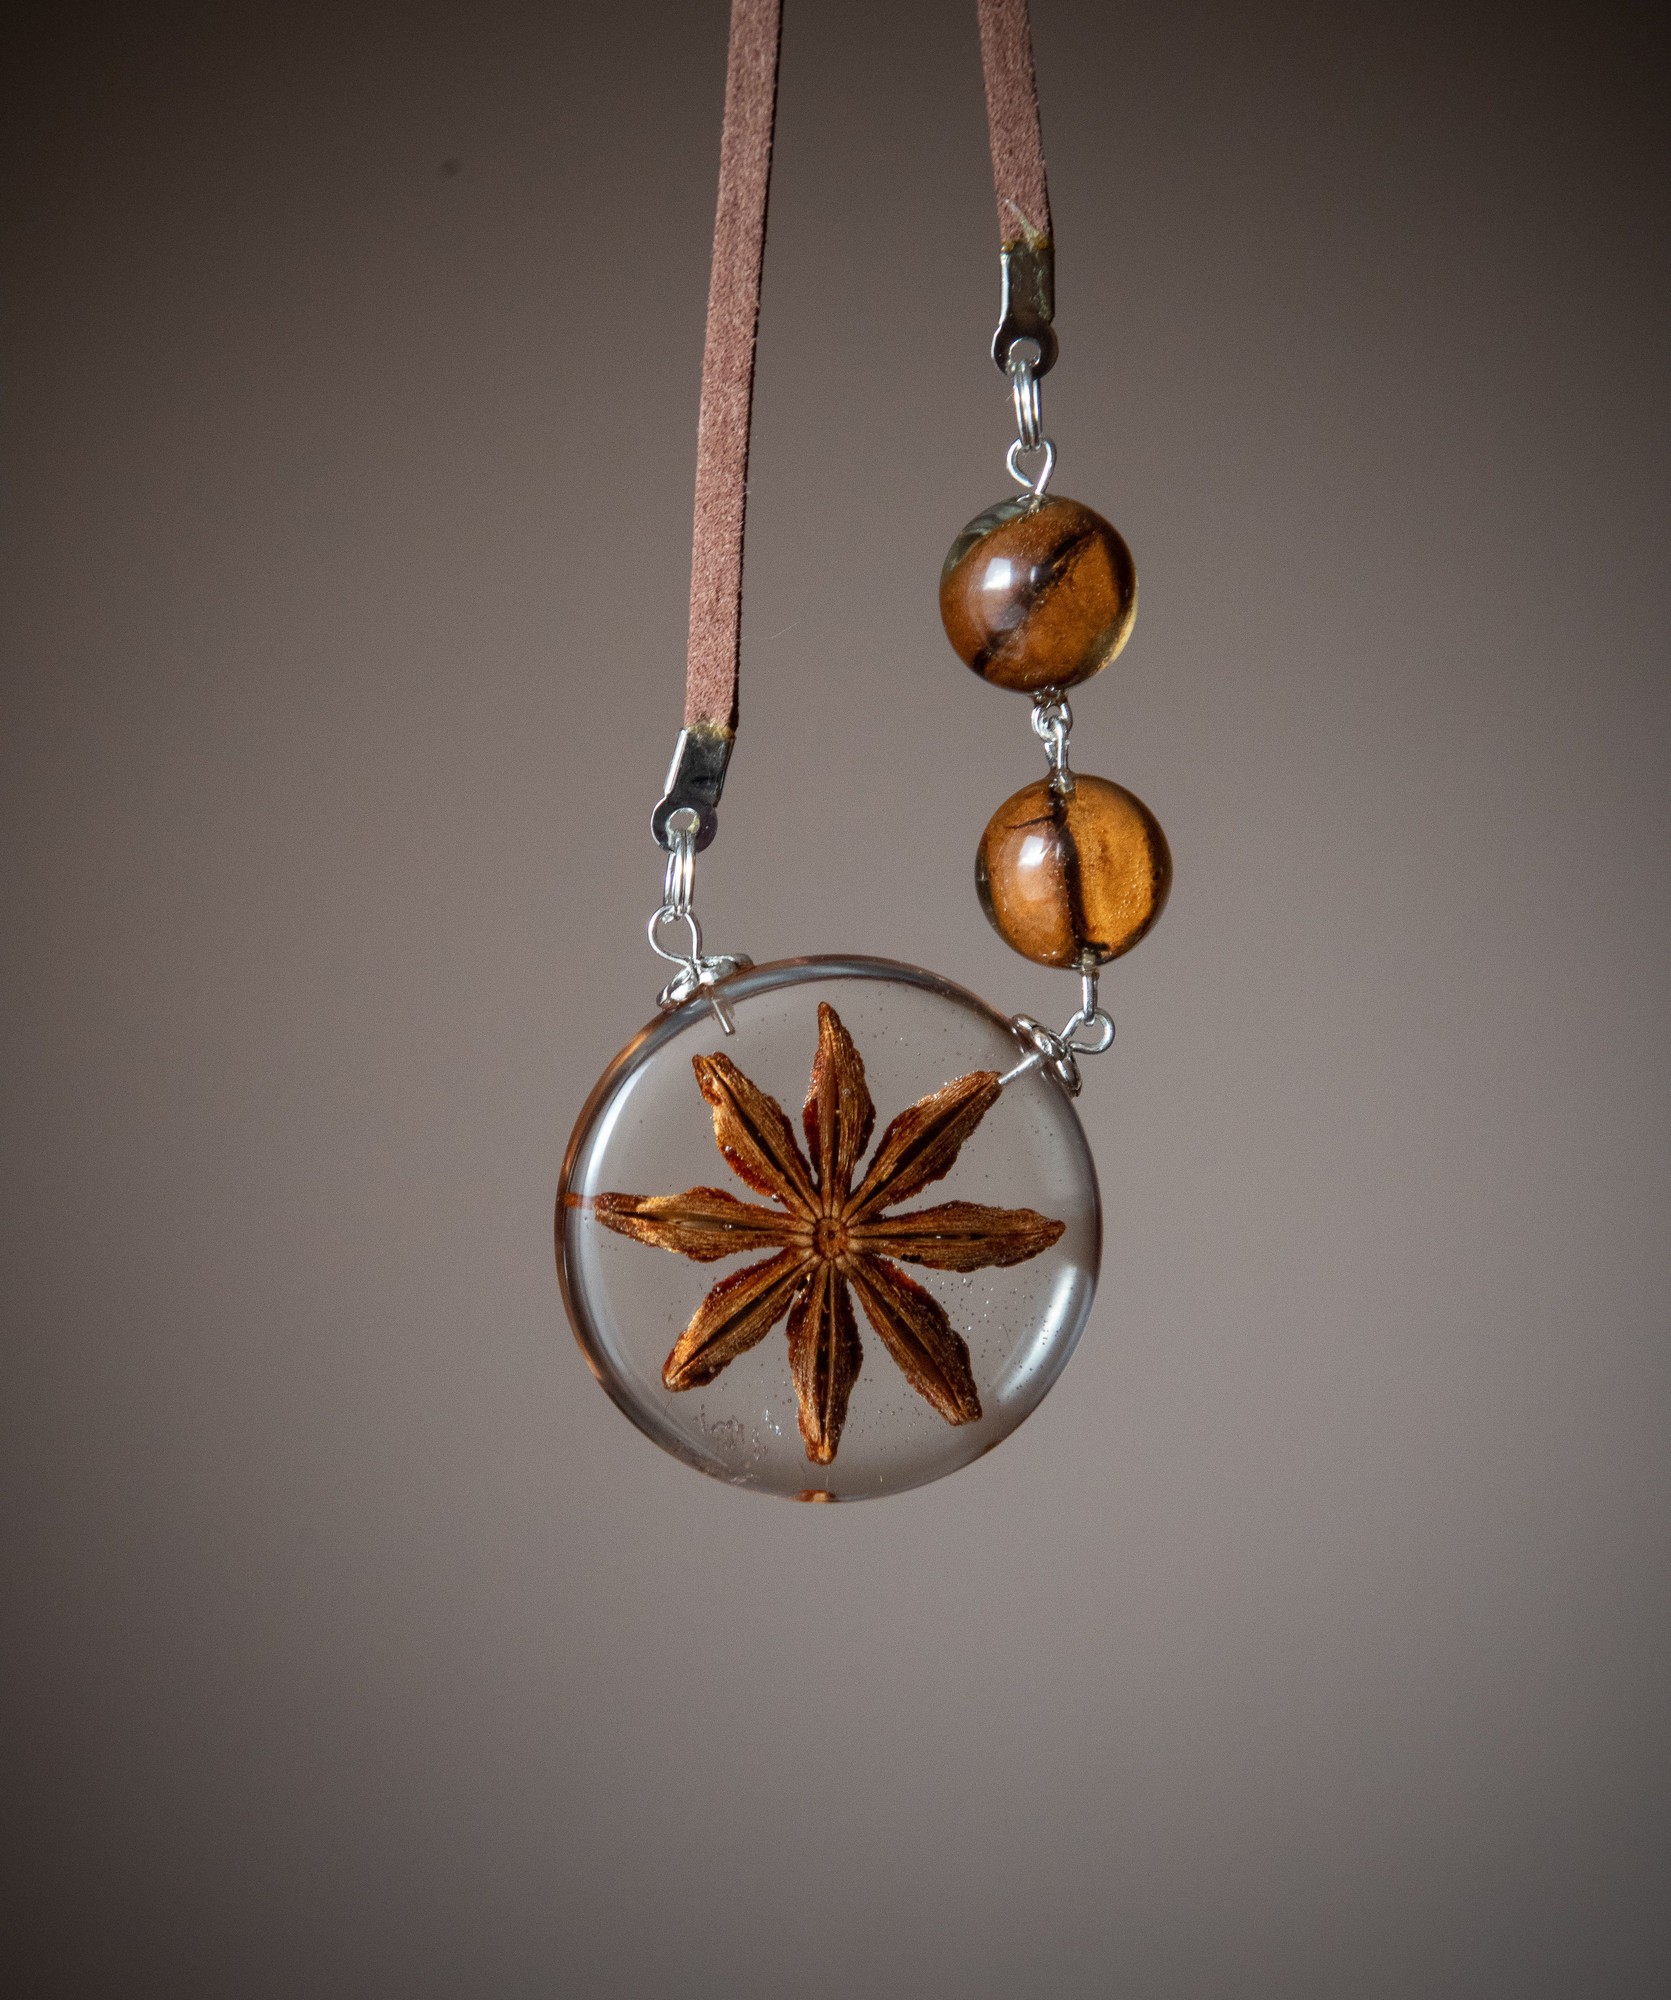 Star anise and coffee beans necklace